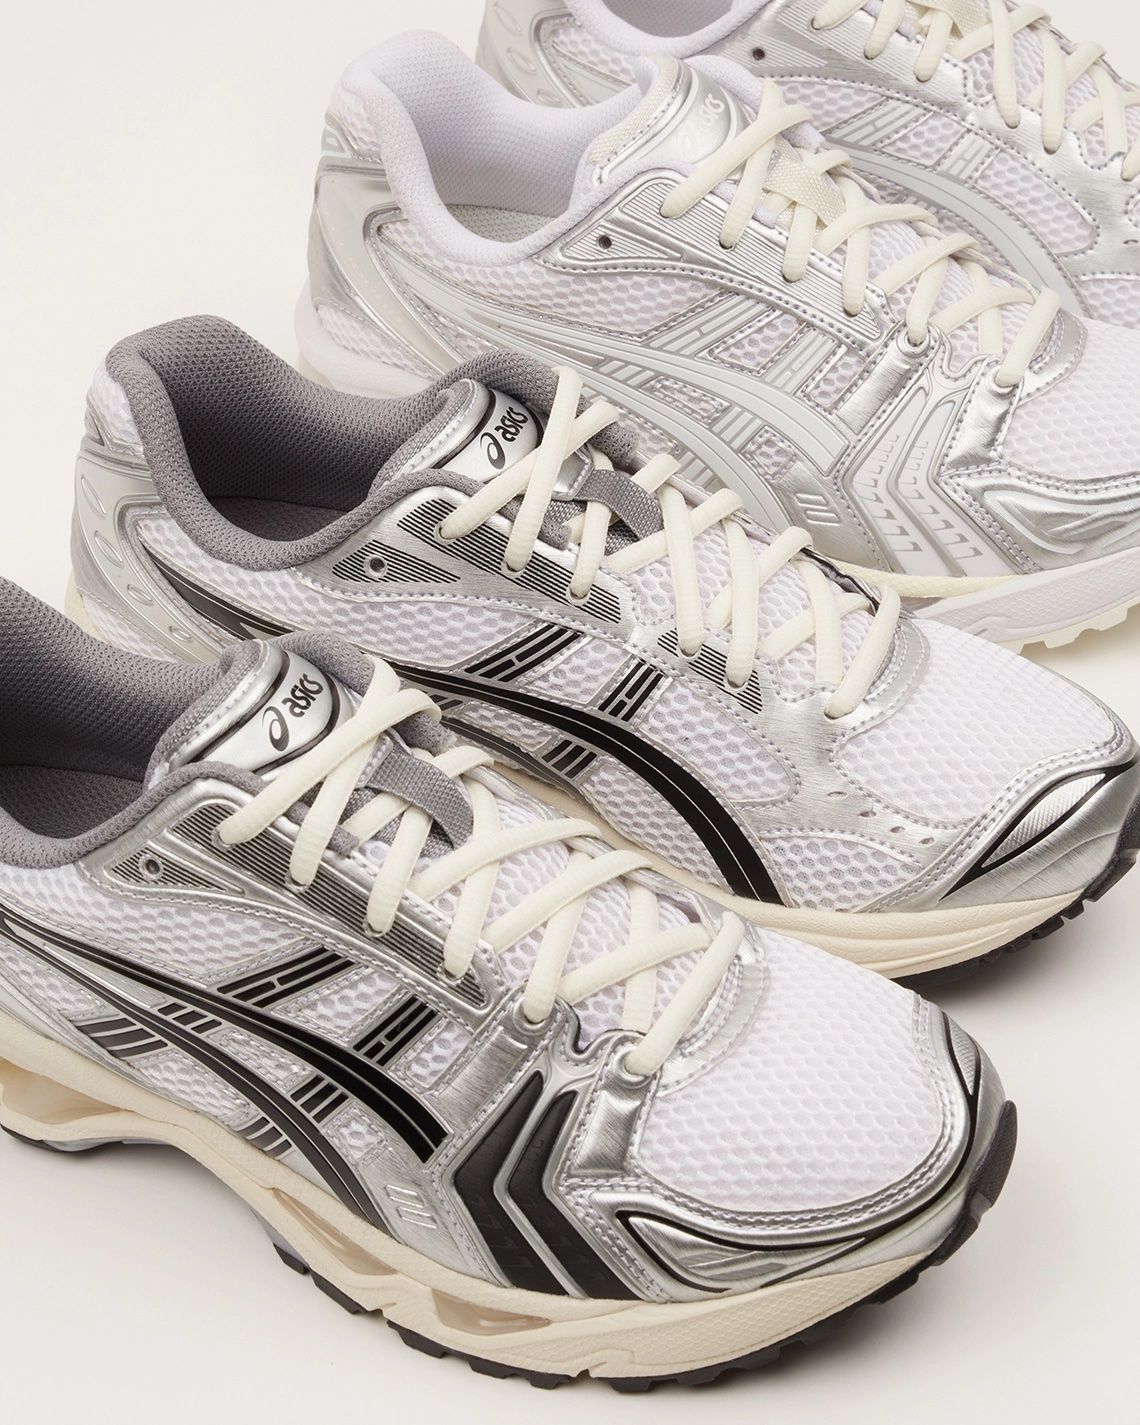 Asics Sneakers Are Everywhere, But Now? We Found Out